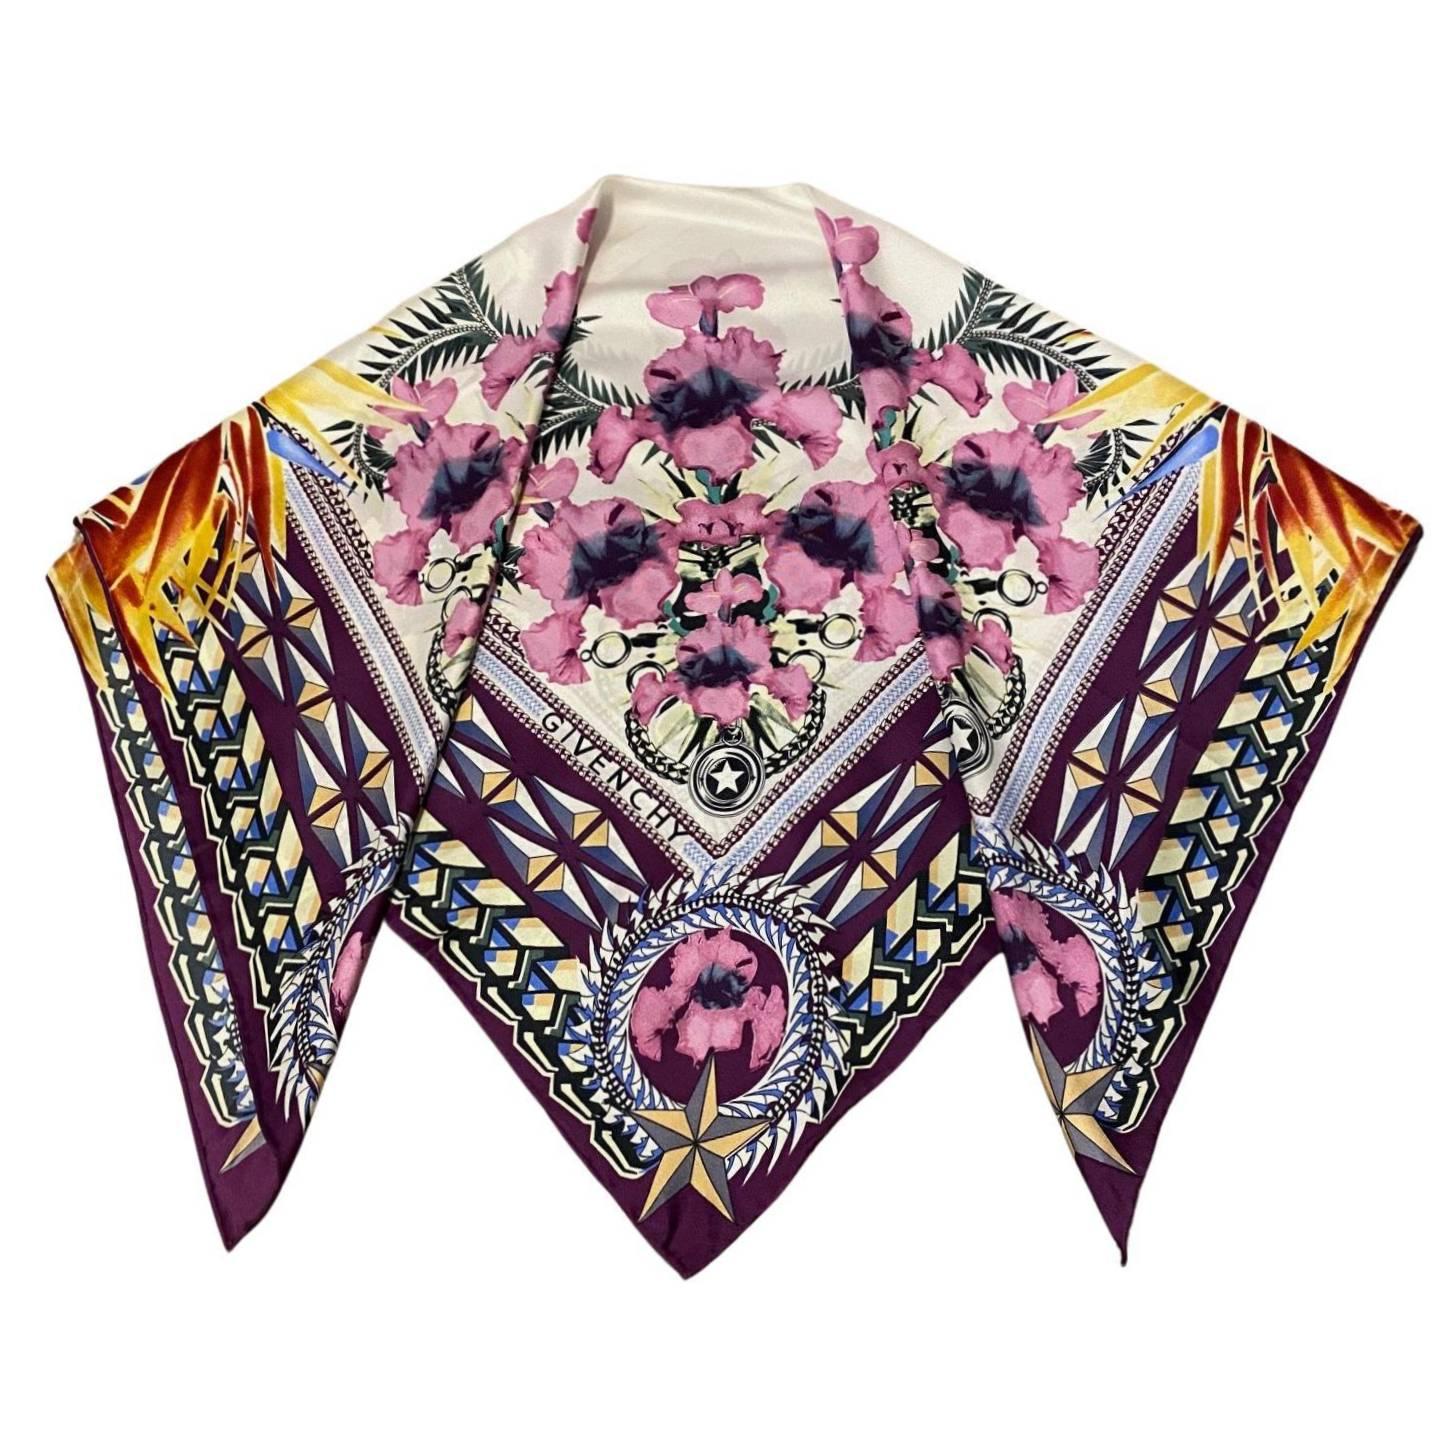 Givenchy babushka scarf featuring multicolor floral print and geometric pattern, large so it can be worn as babushka too, made of silk. 

Condition: 1980s, very good, minimal wear 

Dimensions: 75x75cm / 29.5x29.5in 